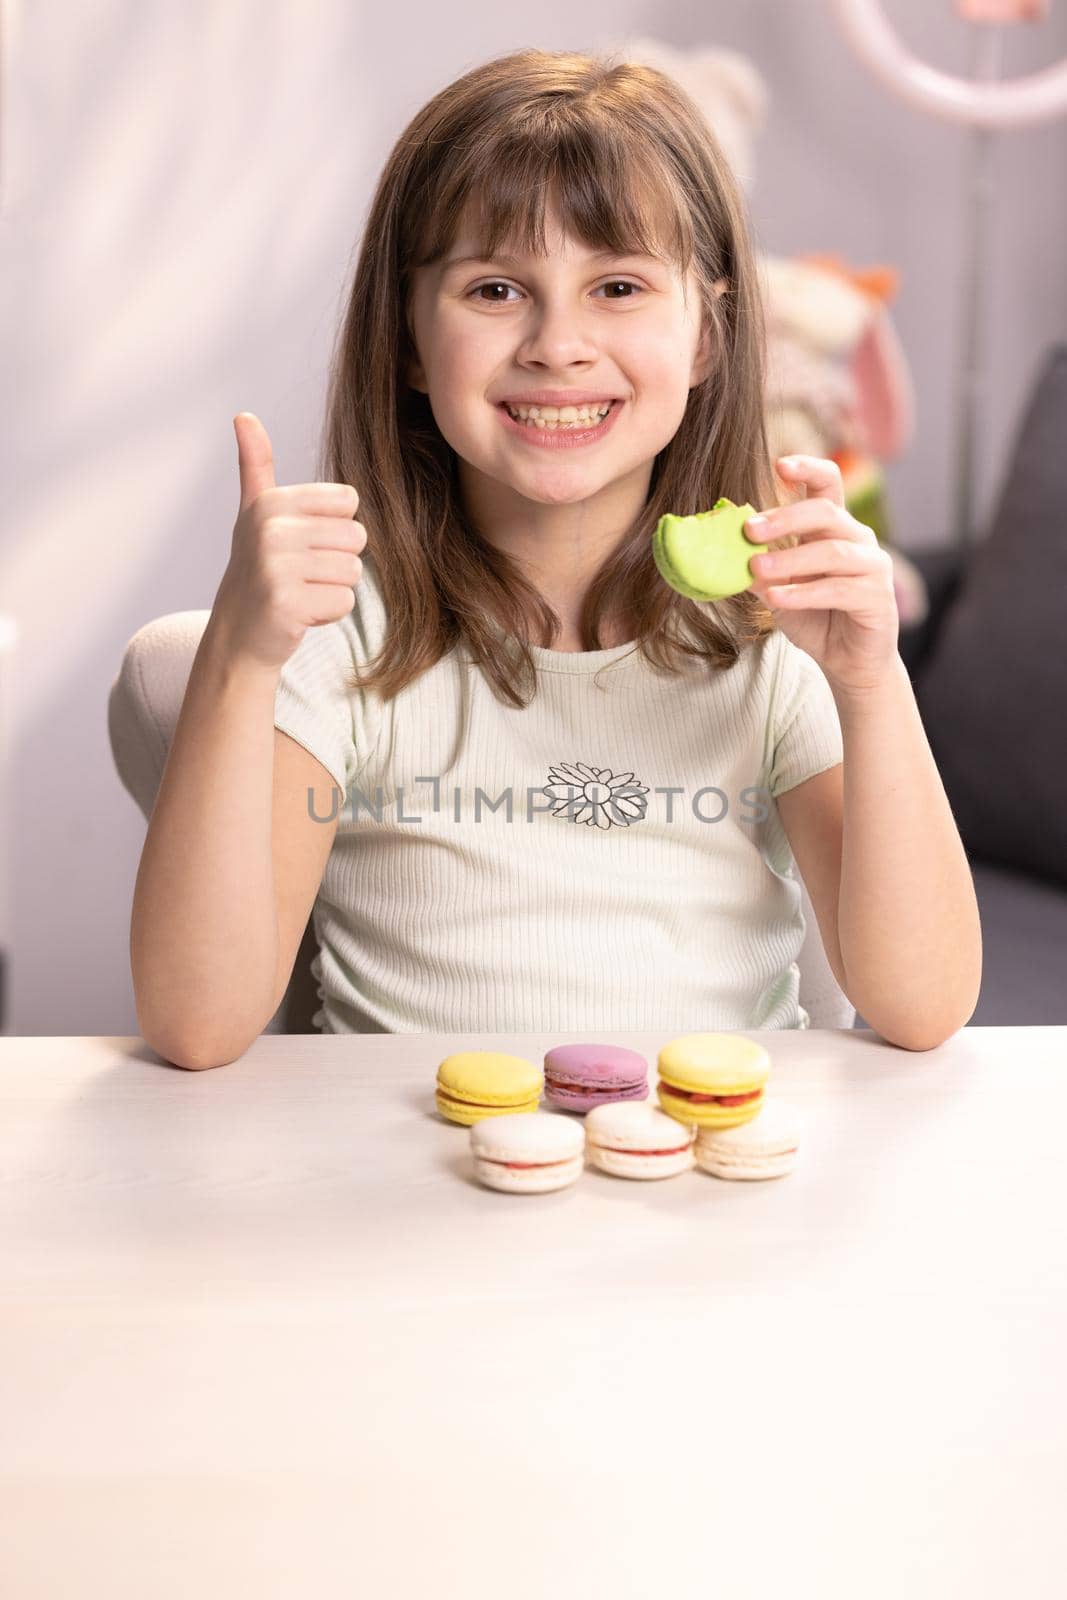 Attractive scholl girl bites a macaroon, surprised with taste, cheerfully smiles shows a finger up. Positive emotions, being a gourmet, sweet tooth, delicious. Female portrait on home background by uflypro